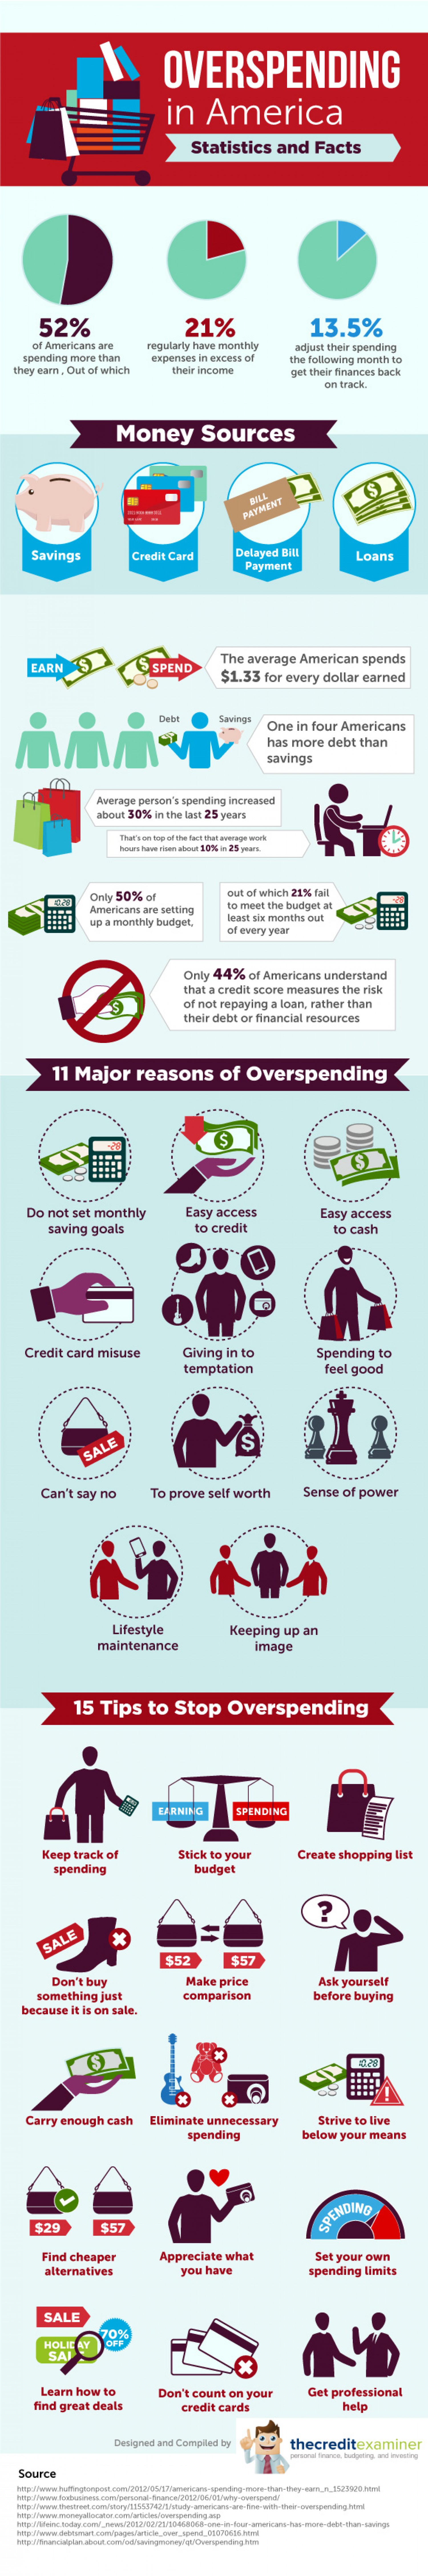 Overspending in America | Photo credit: visual.ly